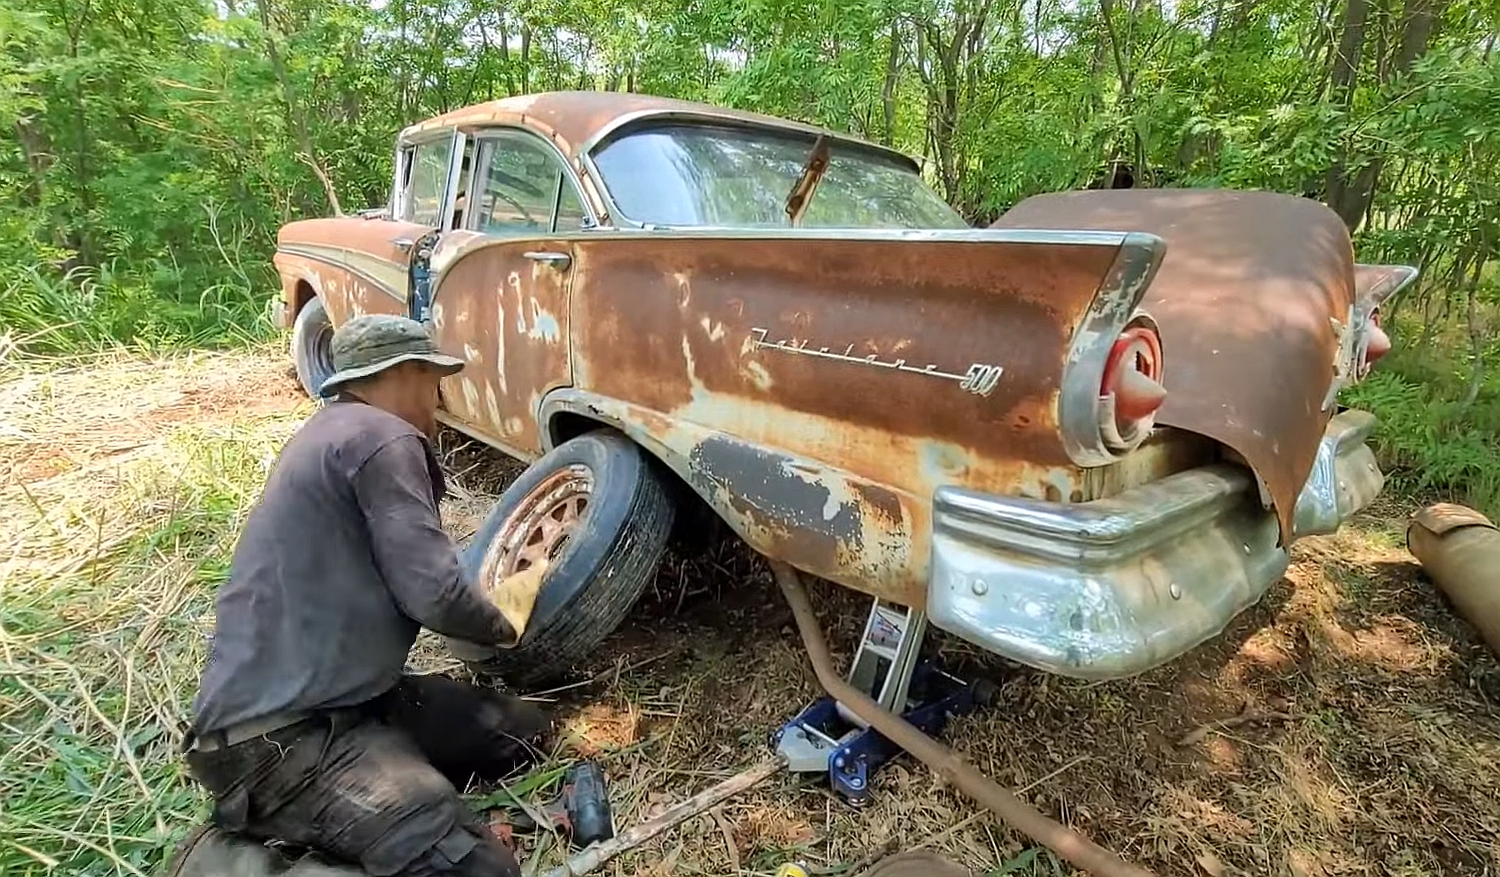 1957 Ford Fairlane Was Left to Rot in the Woods, Gets Unexpected Lifeline - autoevolution